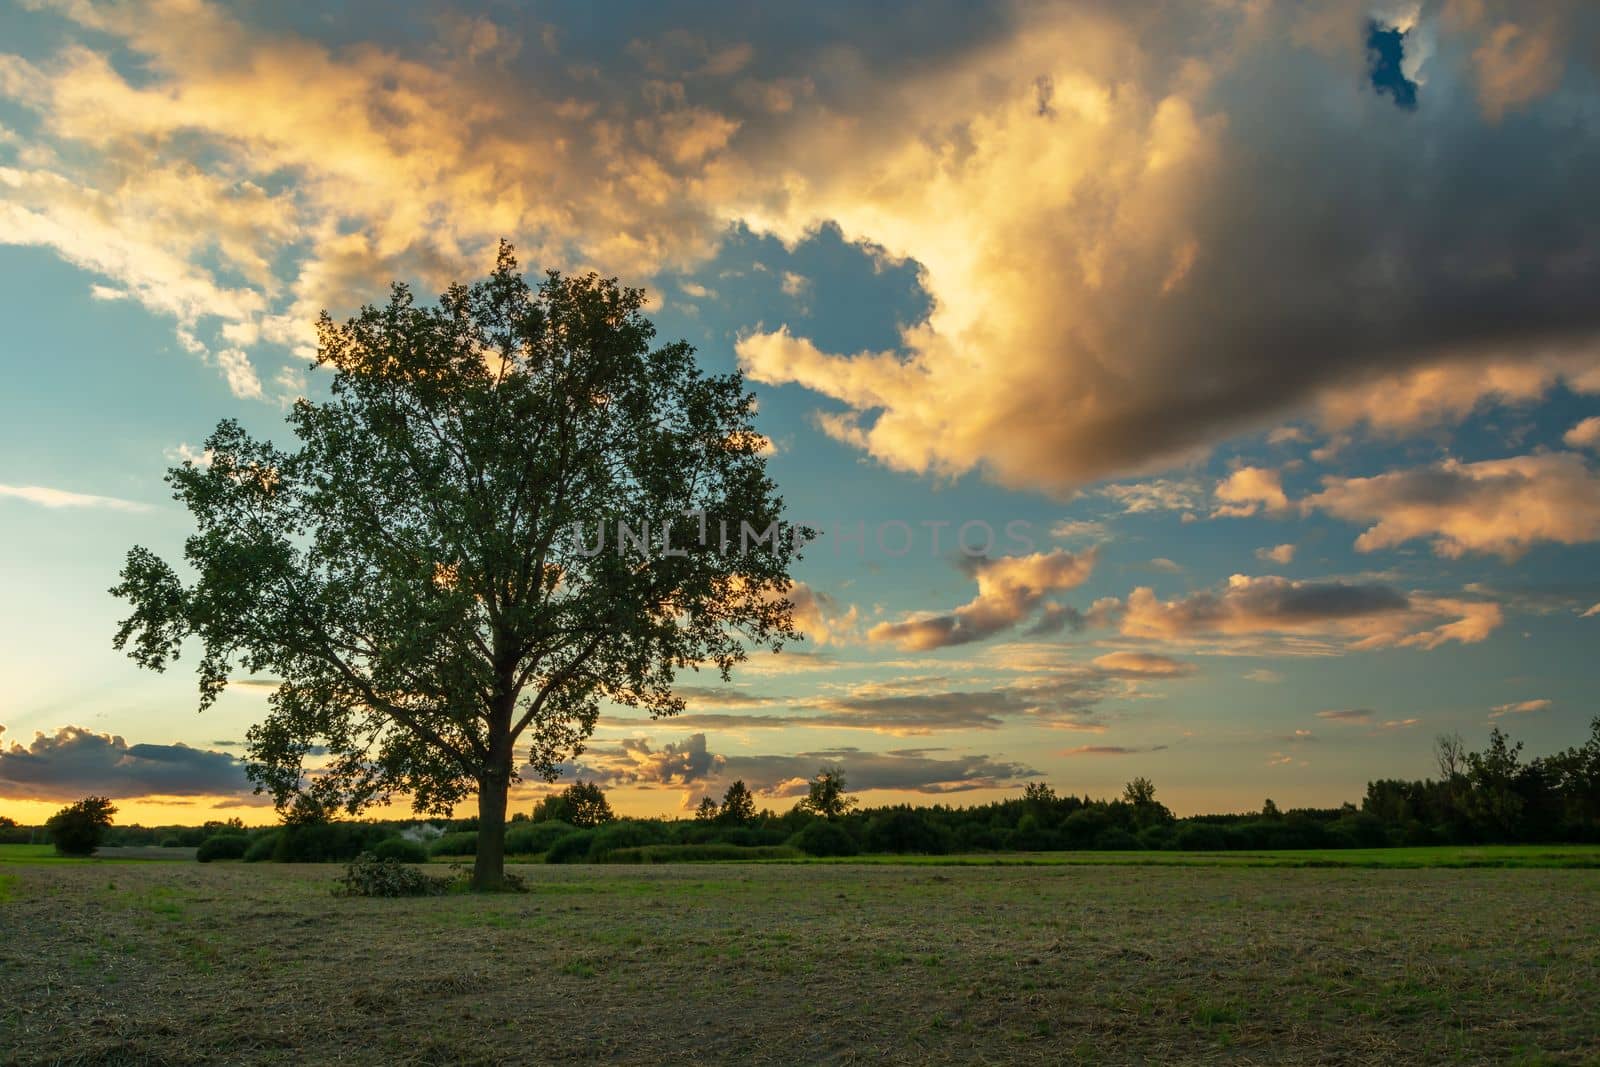 A large oak tree growing in a meadow and evening clouds highlighted by the sun by darekb22